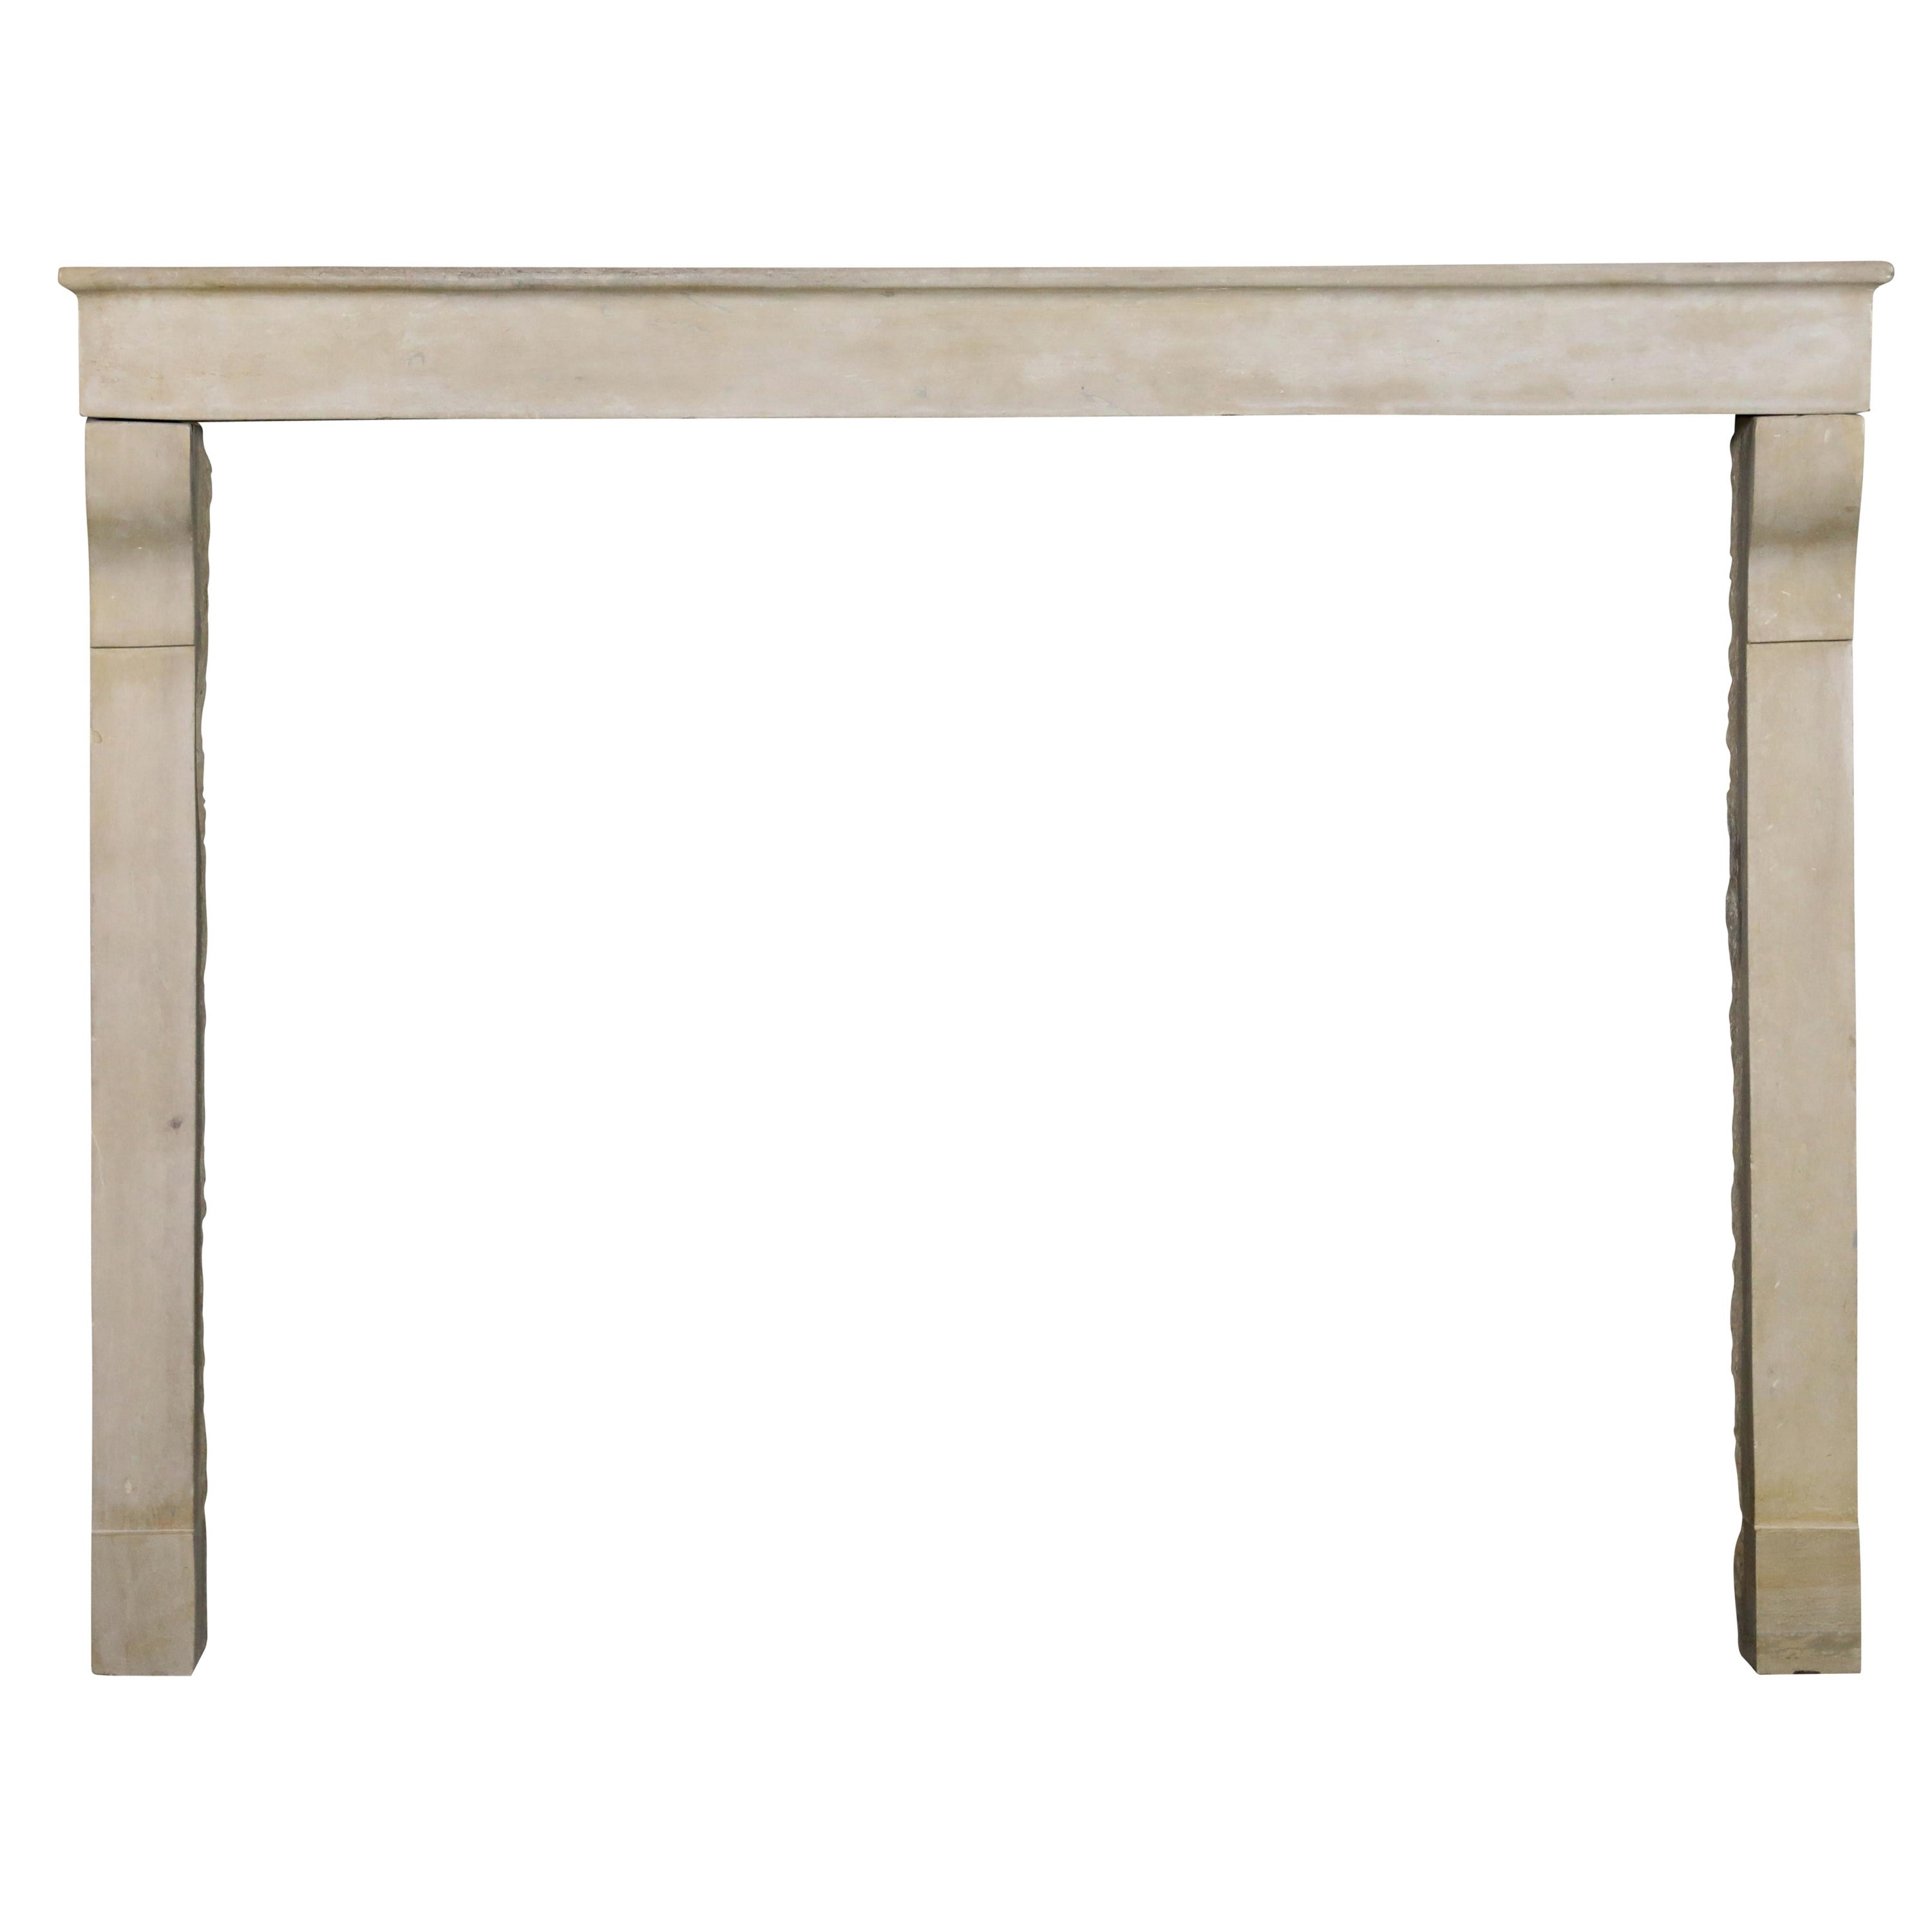 Decorative Antique French Fireplace in Timeless Beige Limestone